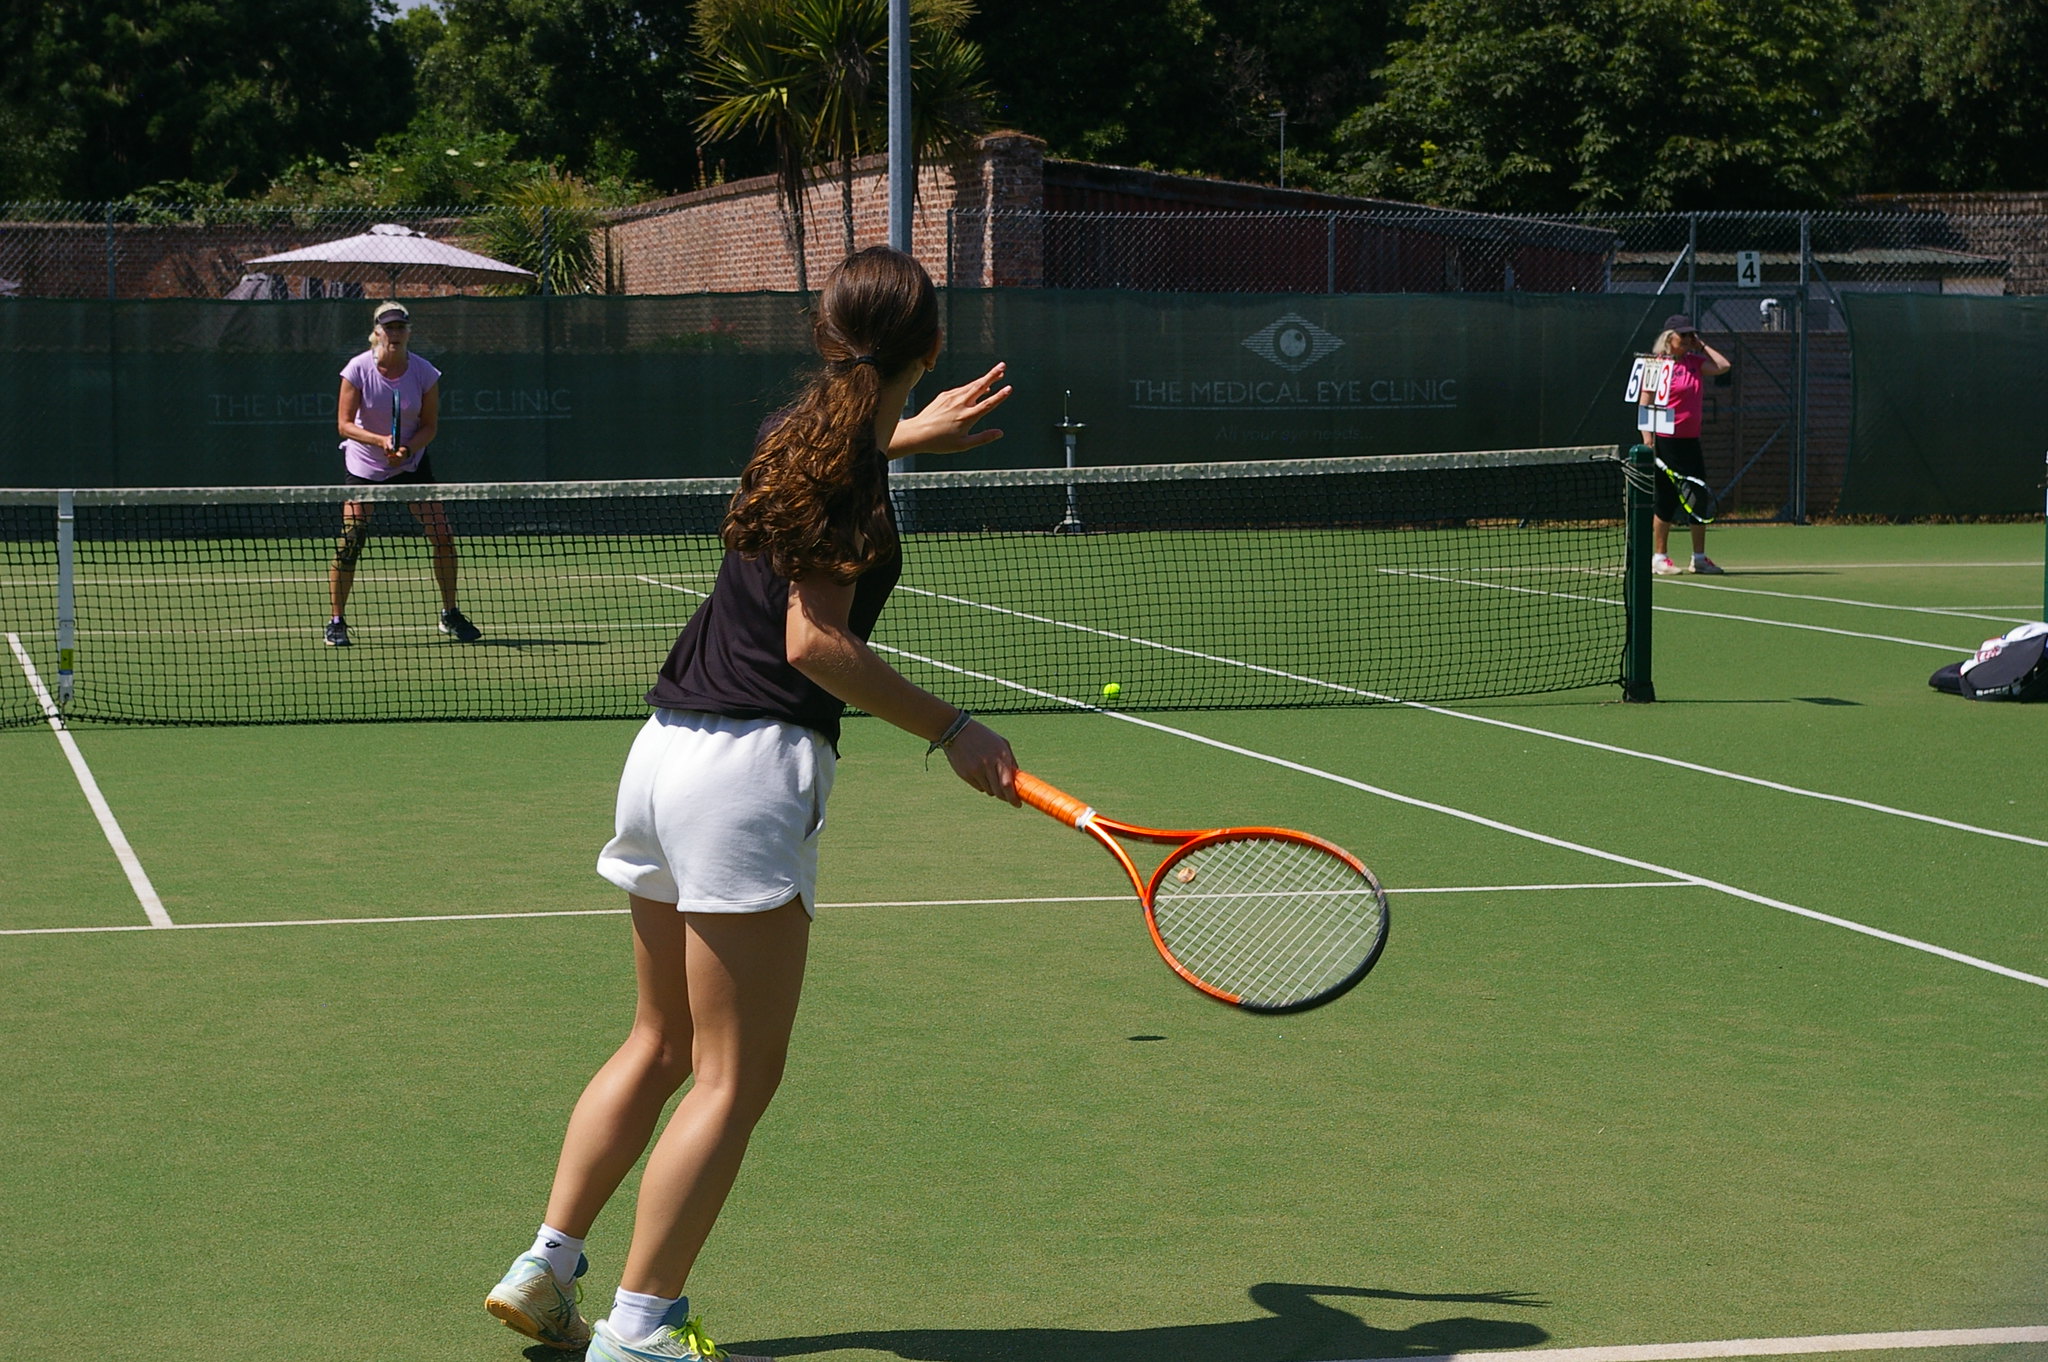 exeter golf and country club tennis